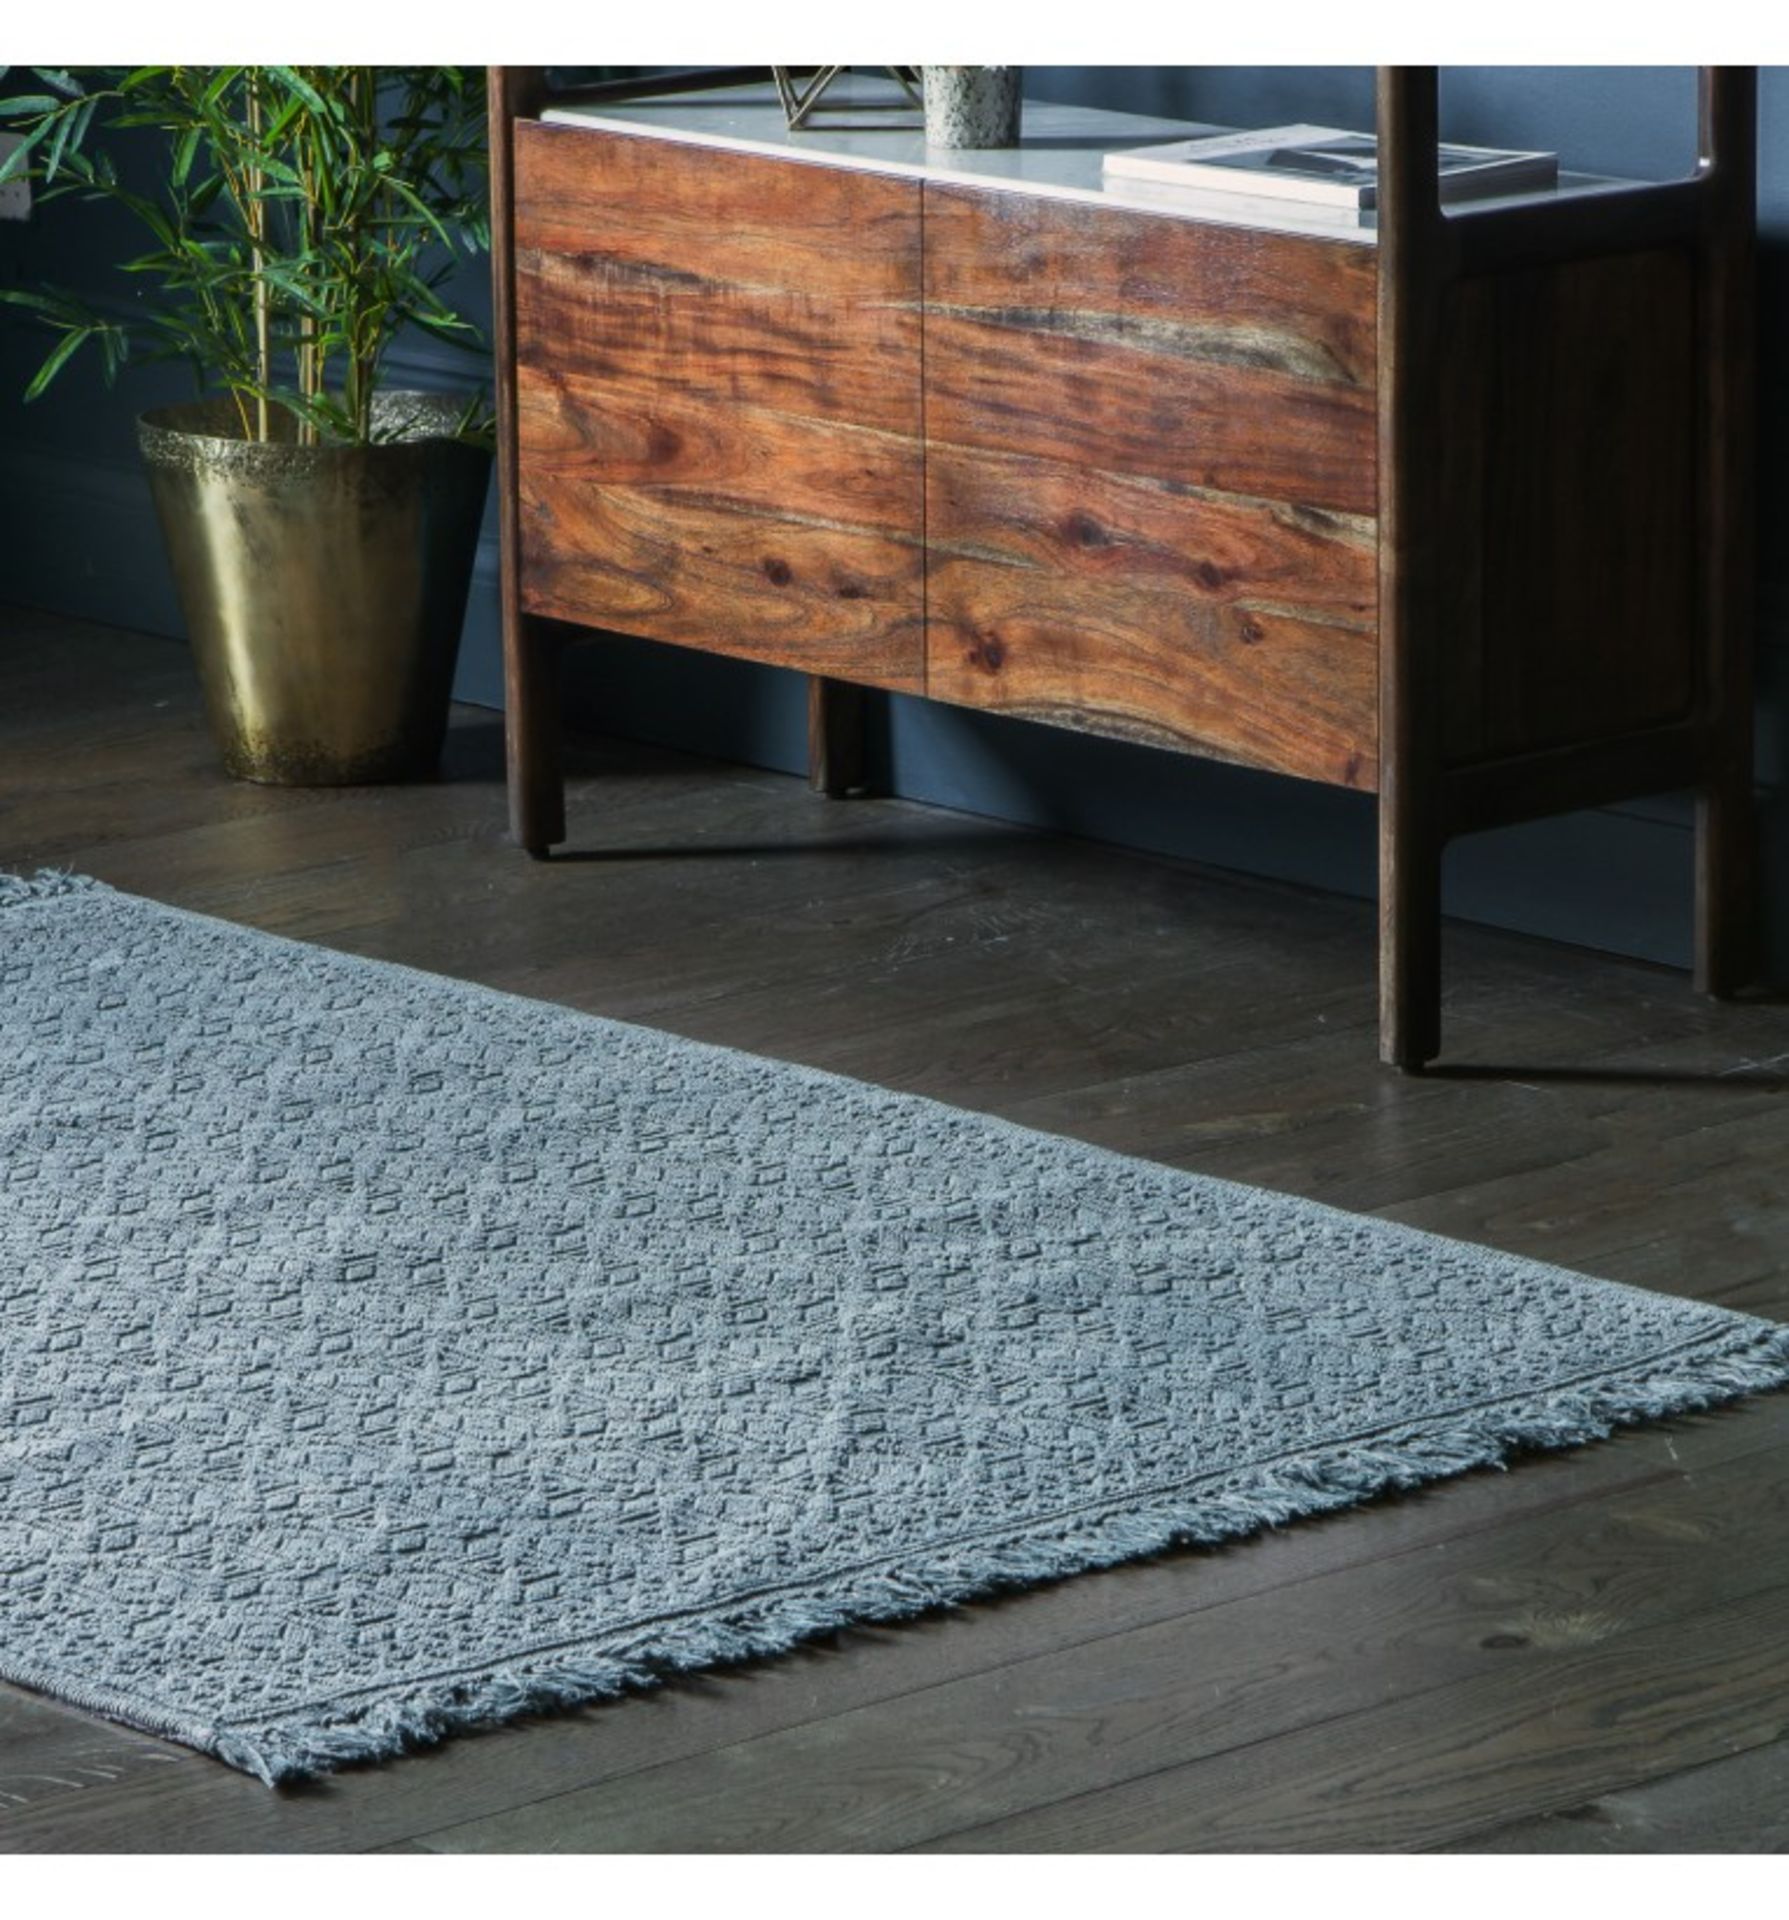 Wentworth rug jade green The Wentworth Rug is the latest addition to our range of home